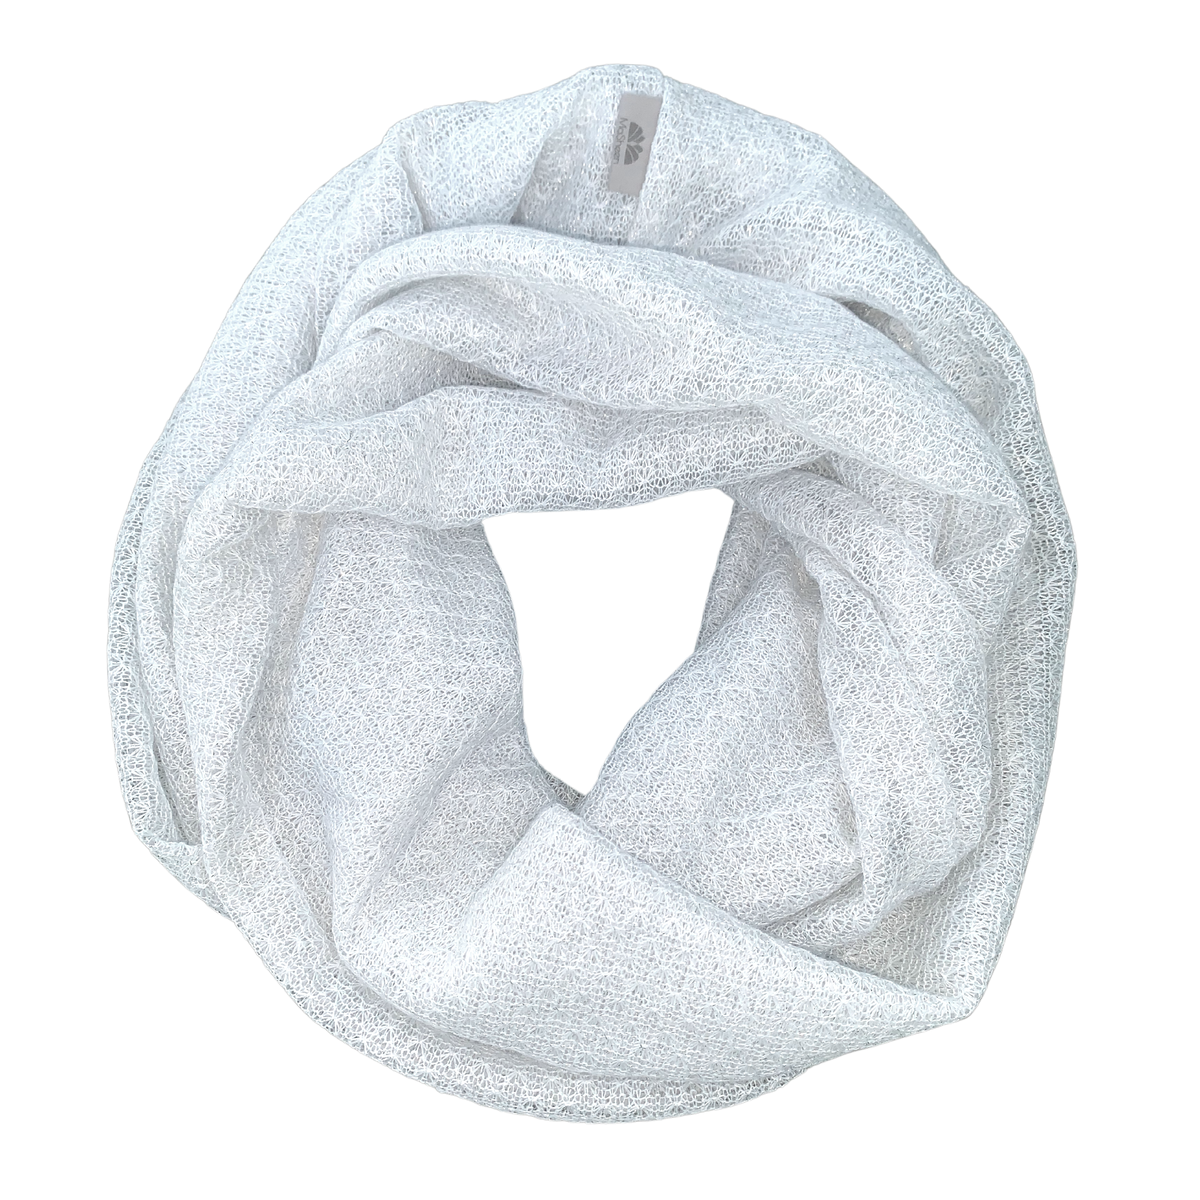 Scarf - Infinity - White Shimmer - Fine Lace Knit | Shop Today. Get it ...